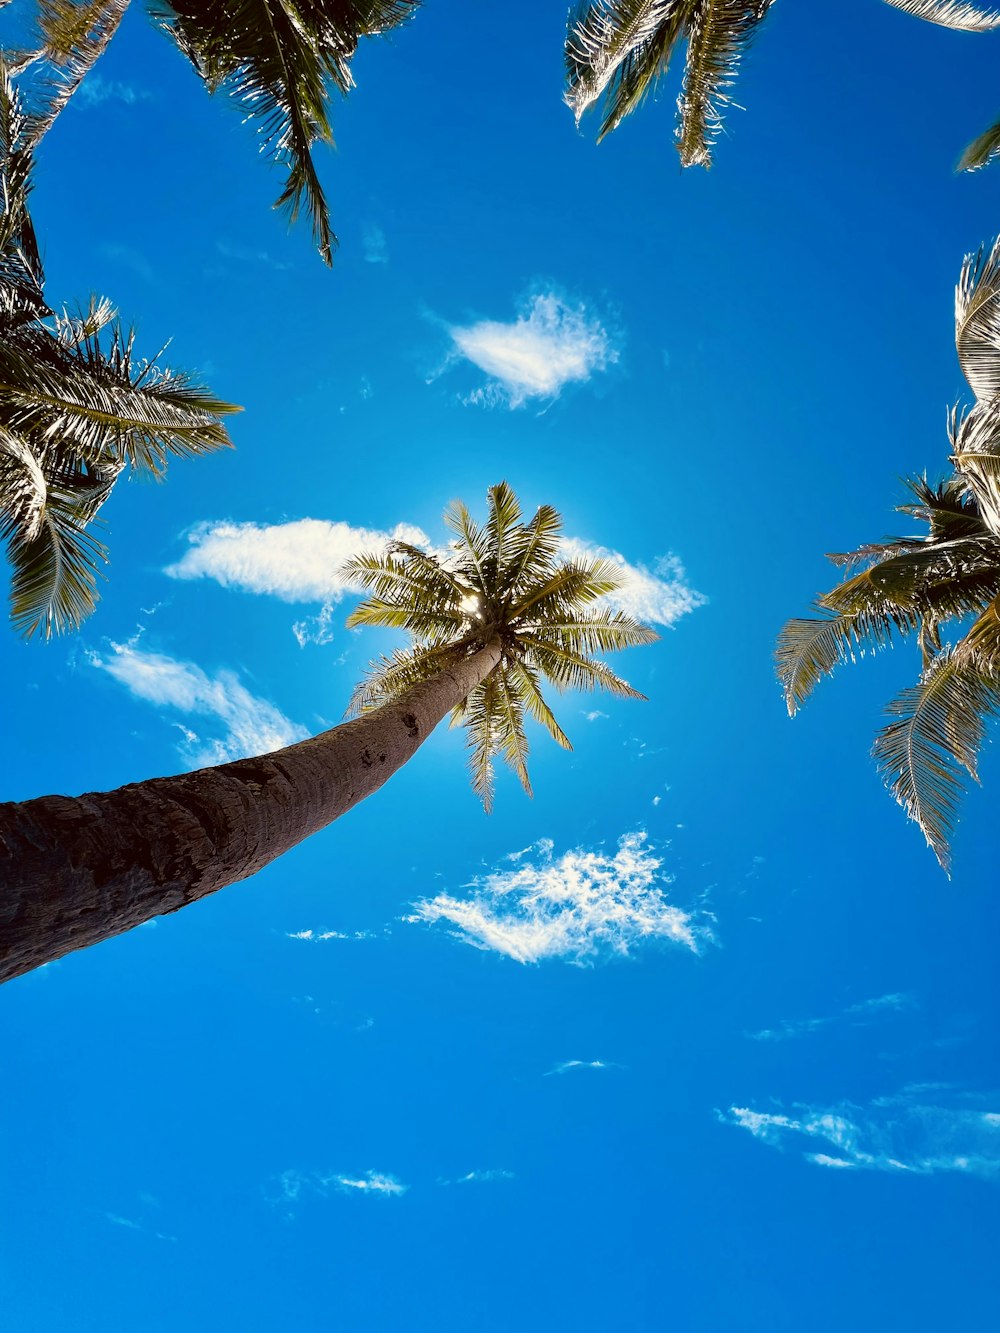 a palm tree with a bright blue sky in the background